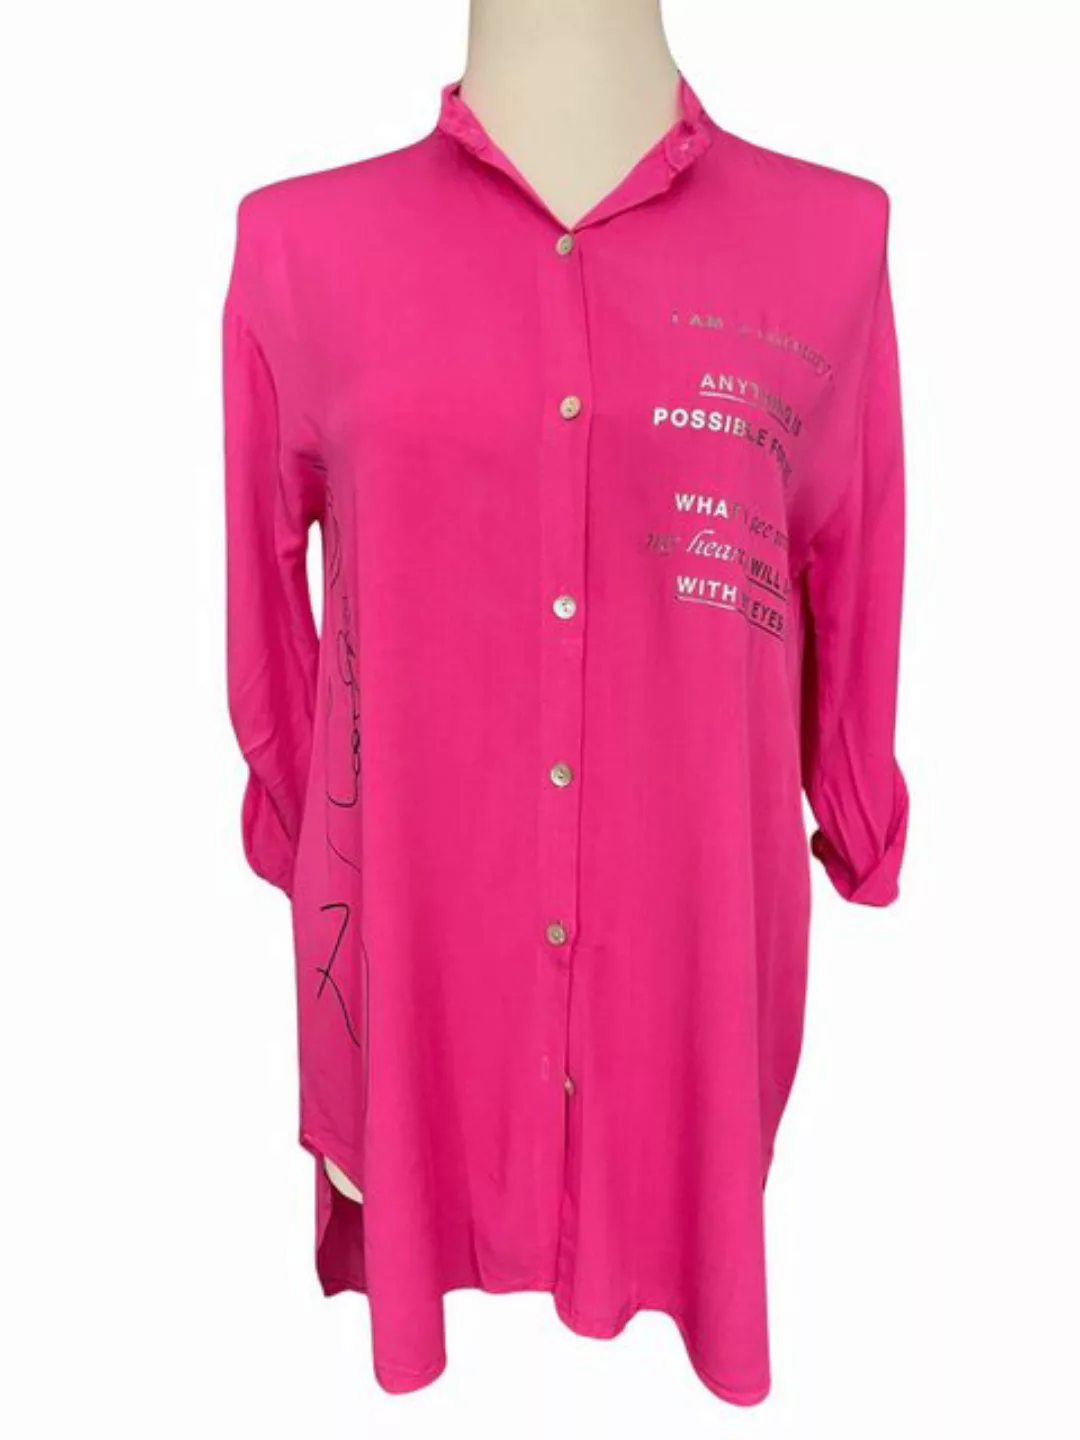 Fashion and Sports Longbluse FaS218 Longbluse Schrift pink AA ca. 55 cm günstig online kaufen